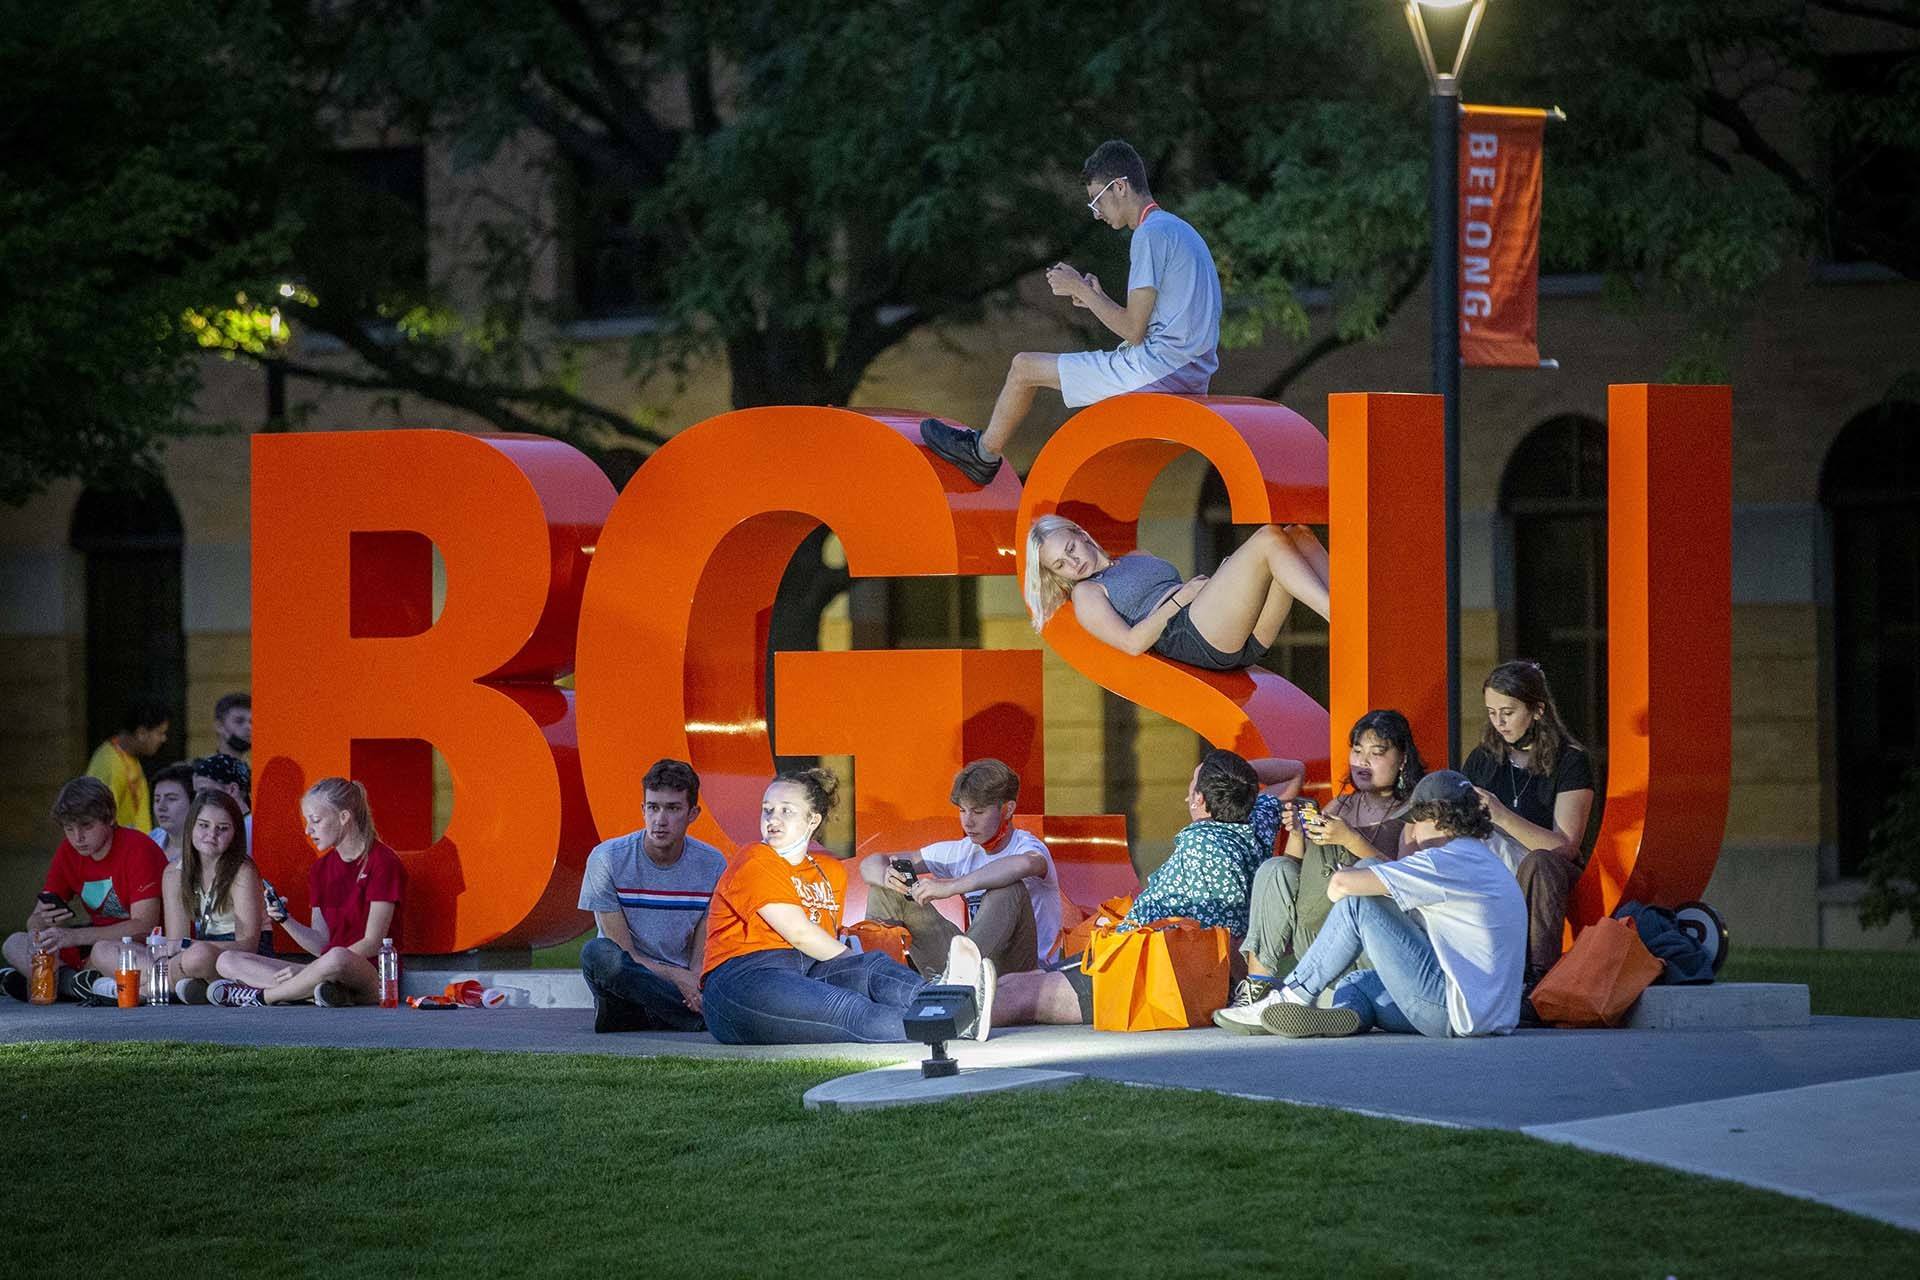 Falcons hang out in the heart of the Bowling Green campus during ‘Falcons After Dark.’